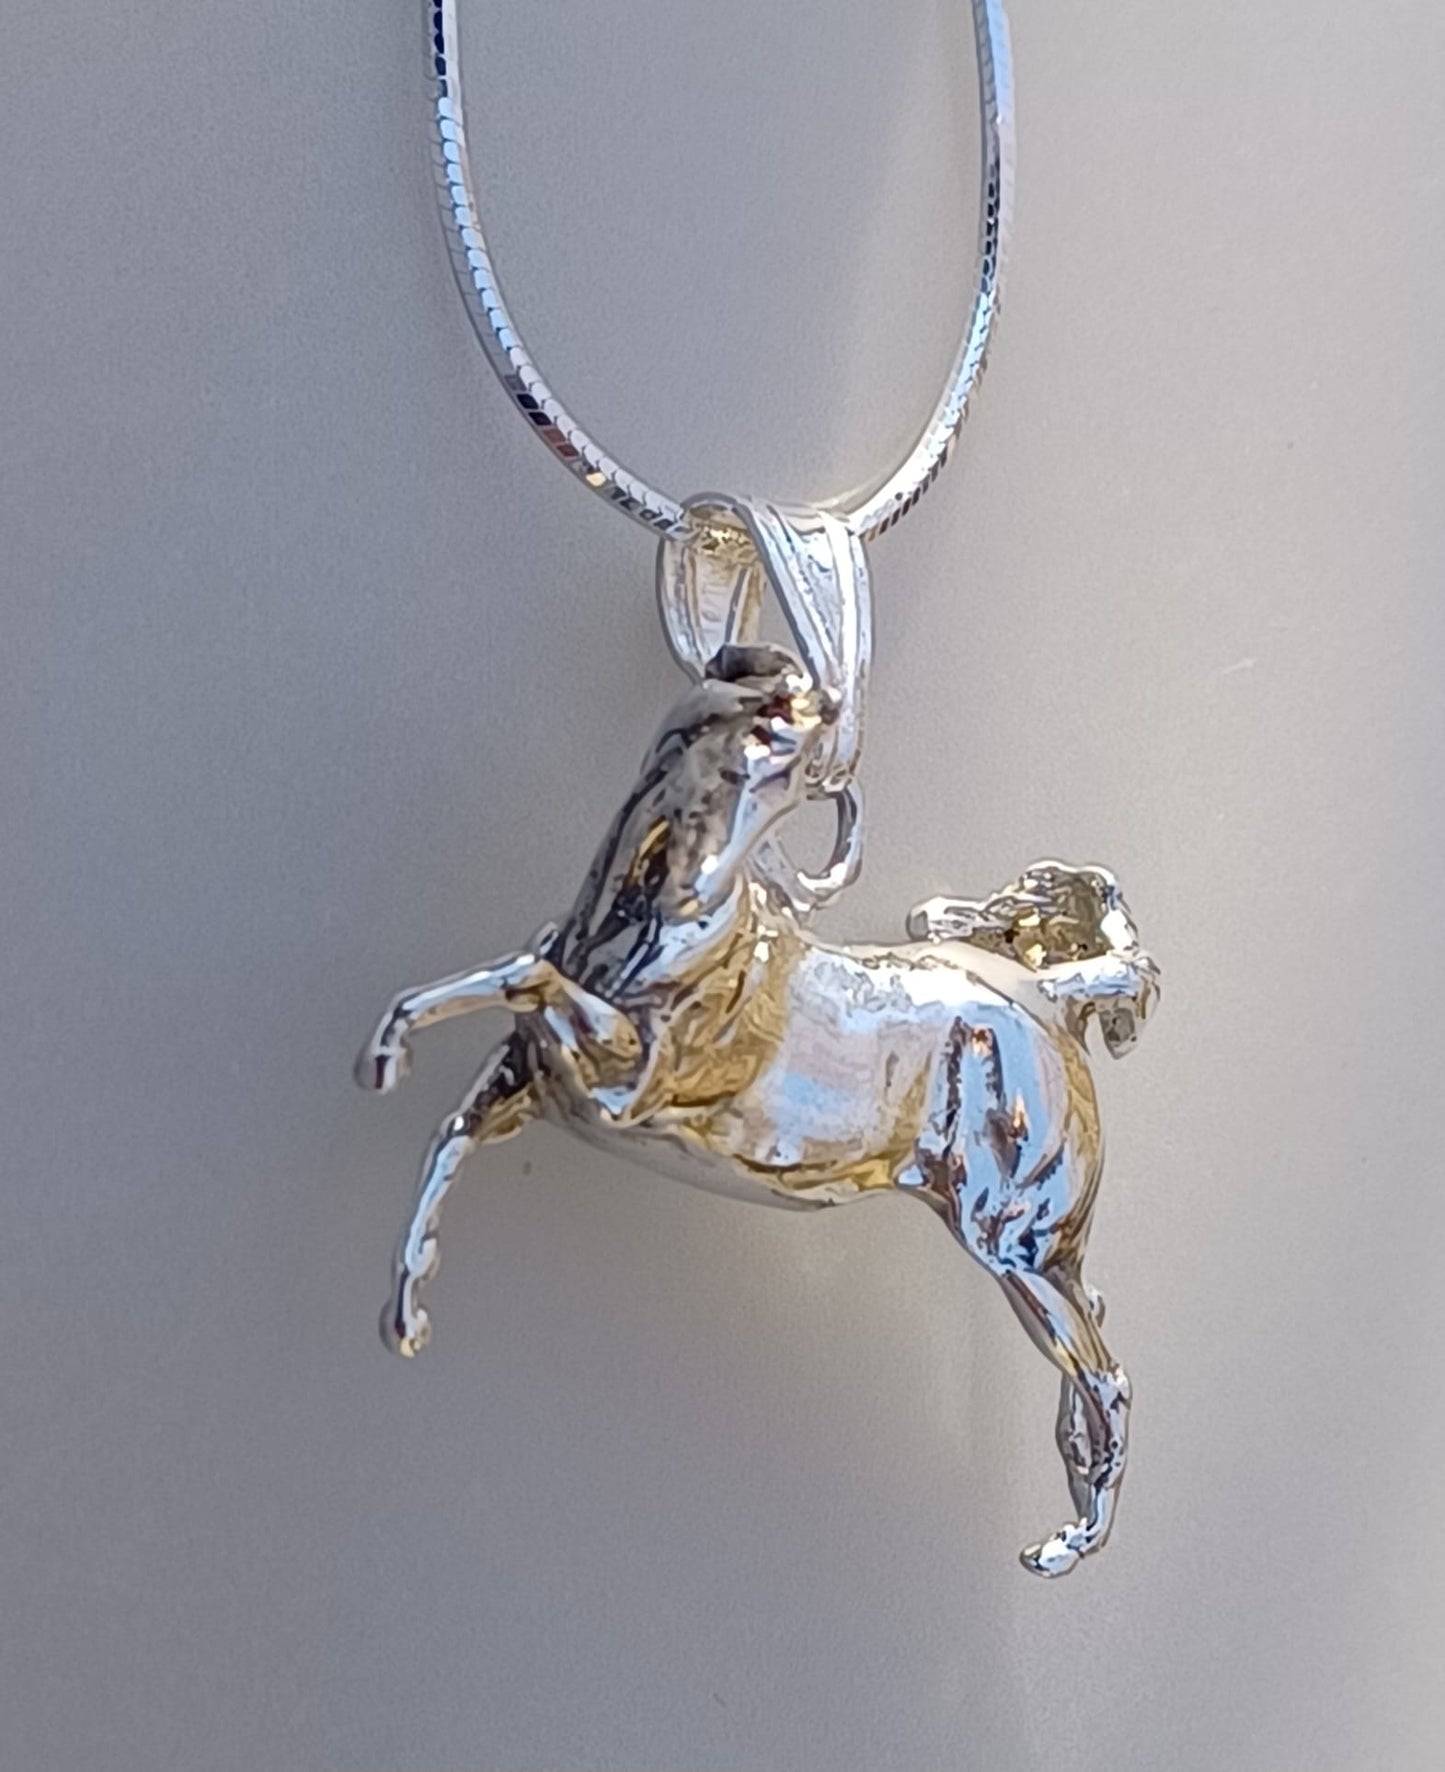 Sculpture replica Twisting Mare Sterling Silver Necklace Pendant and Chain . Zimmer Equestrian